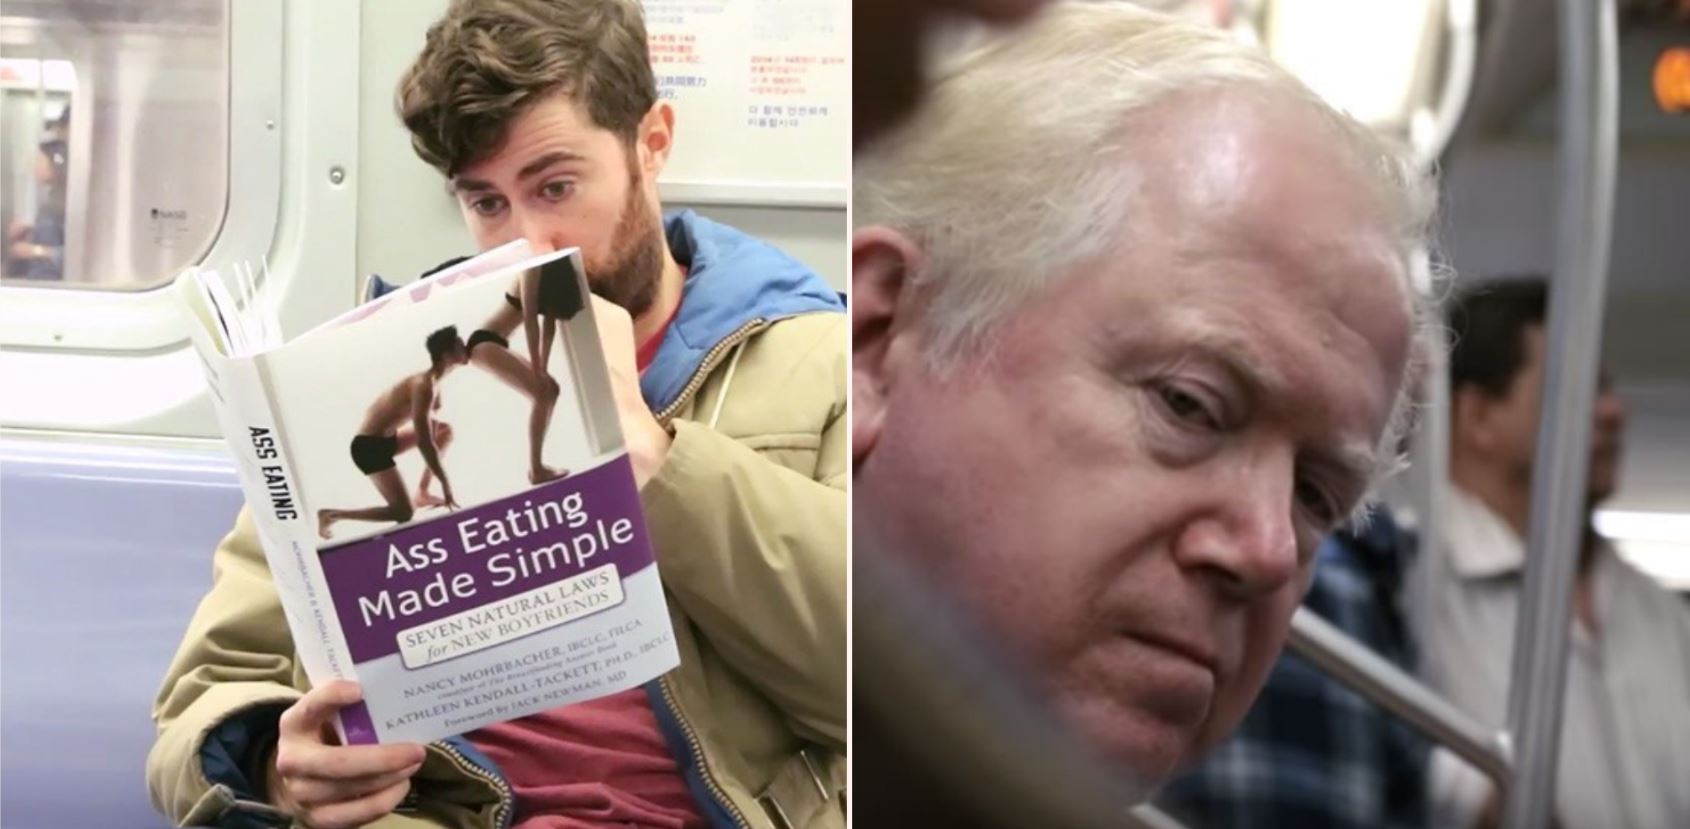 Guy takes fake book covers onto the train to see how people react